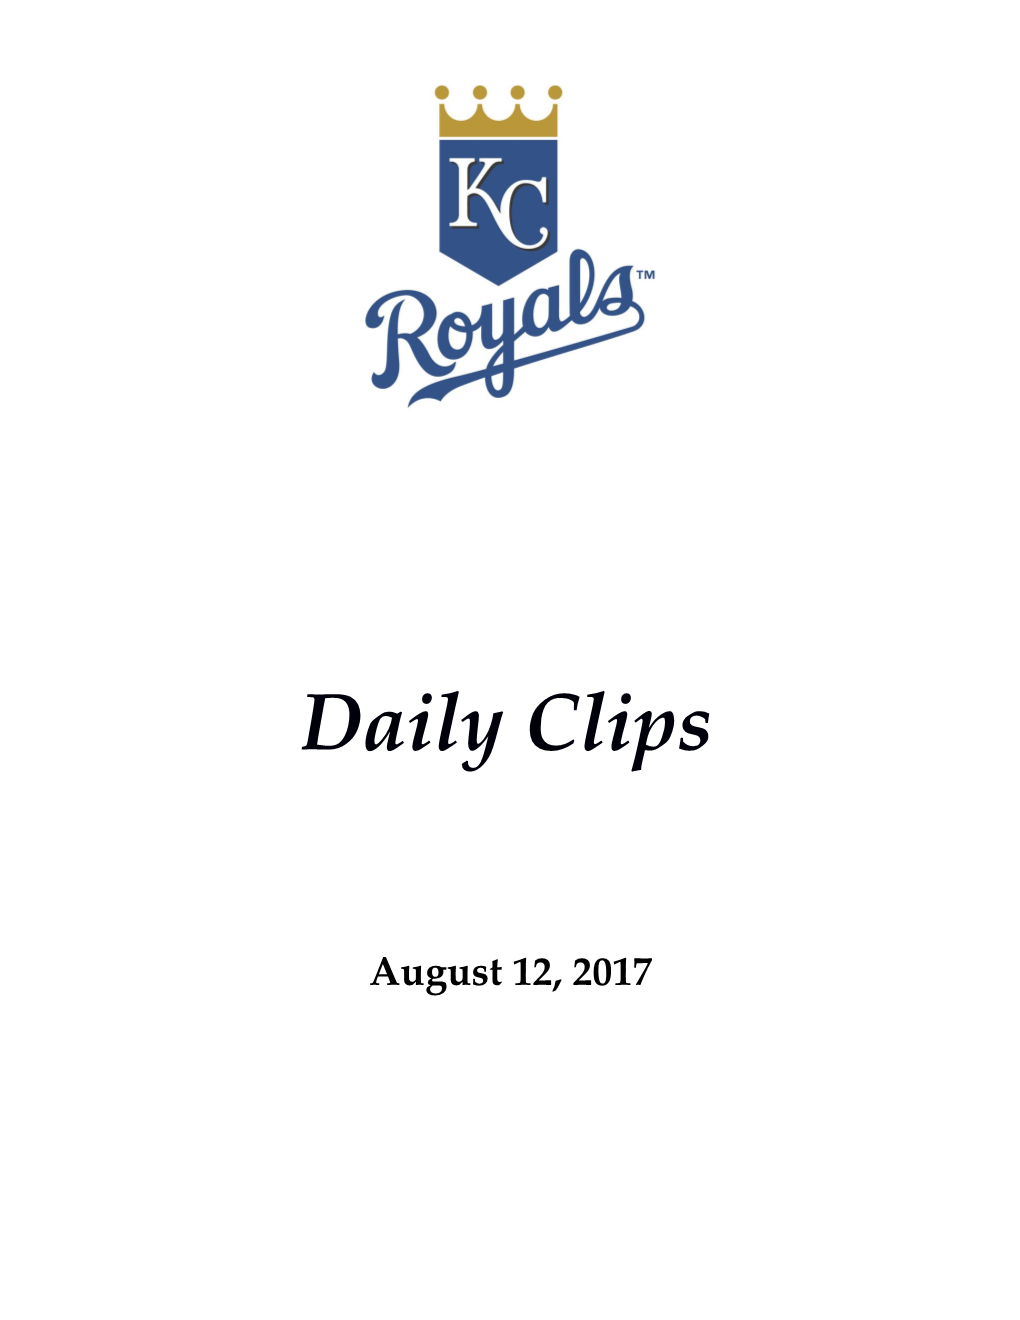 Moose's Pair of Homers Can't End Royals' Skid